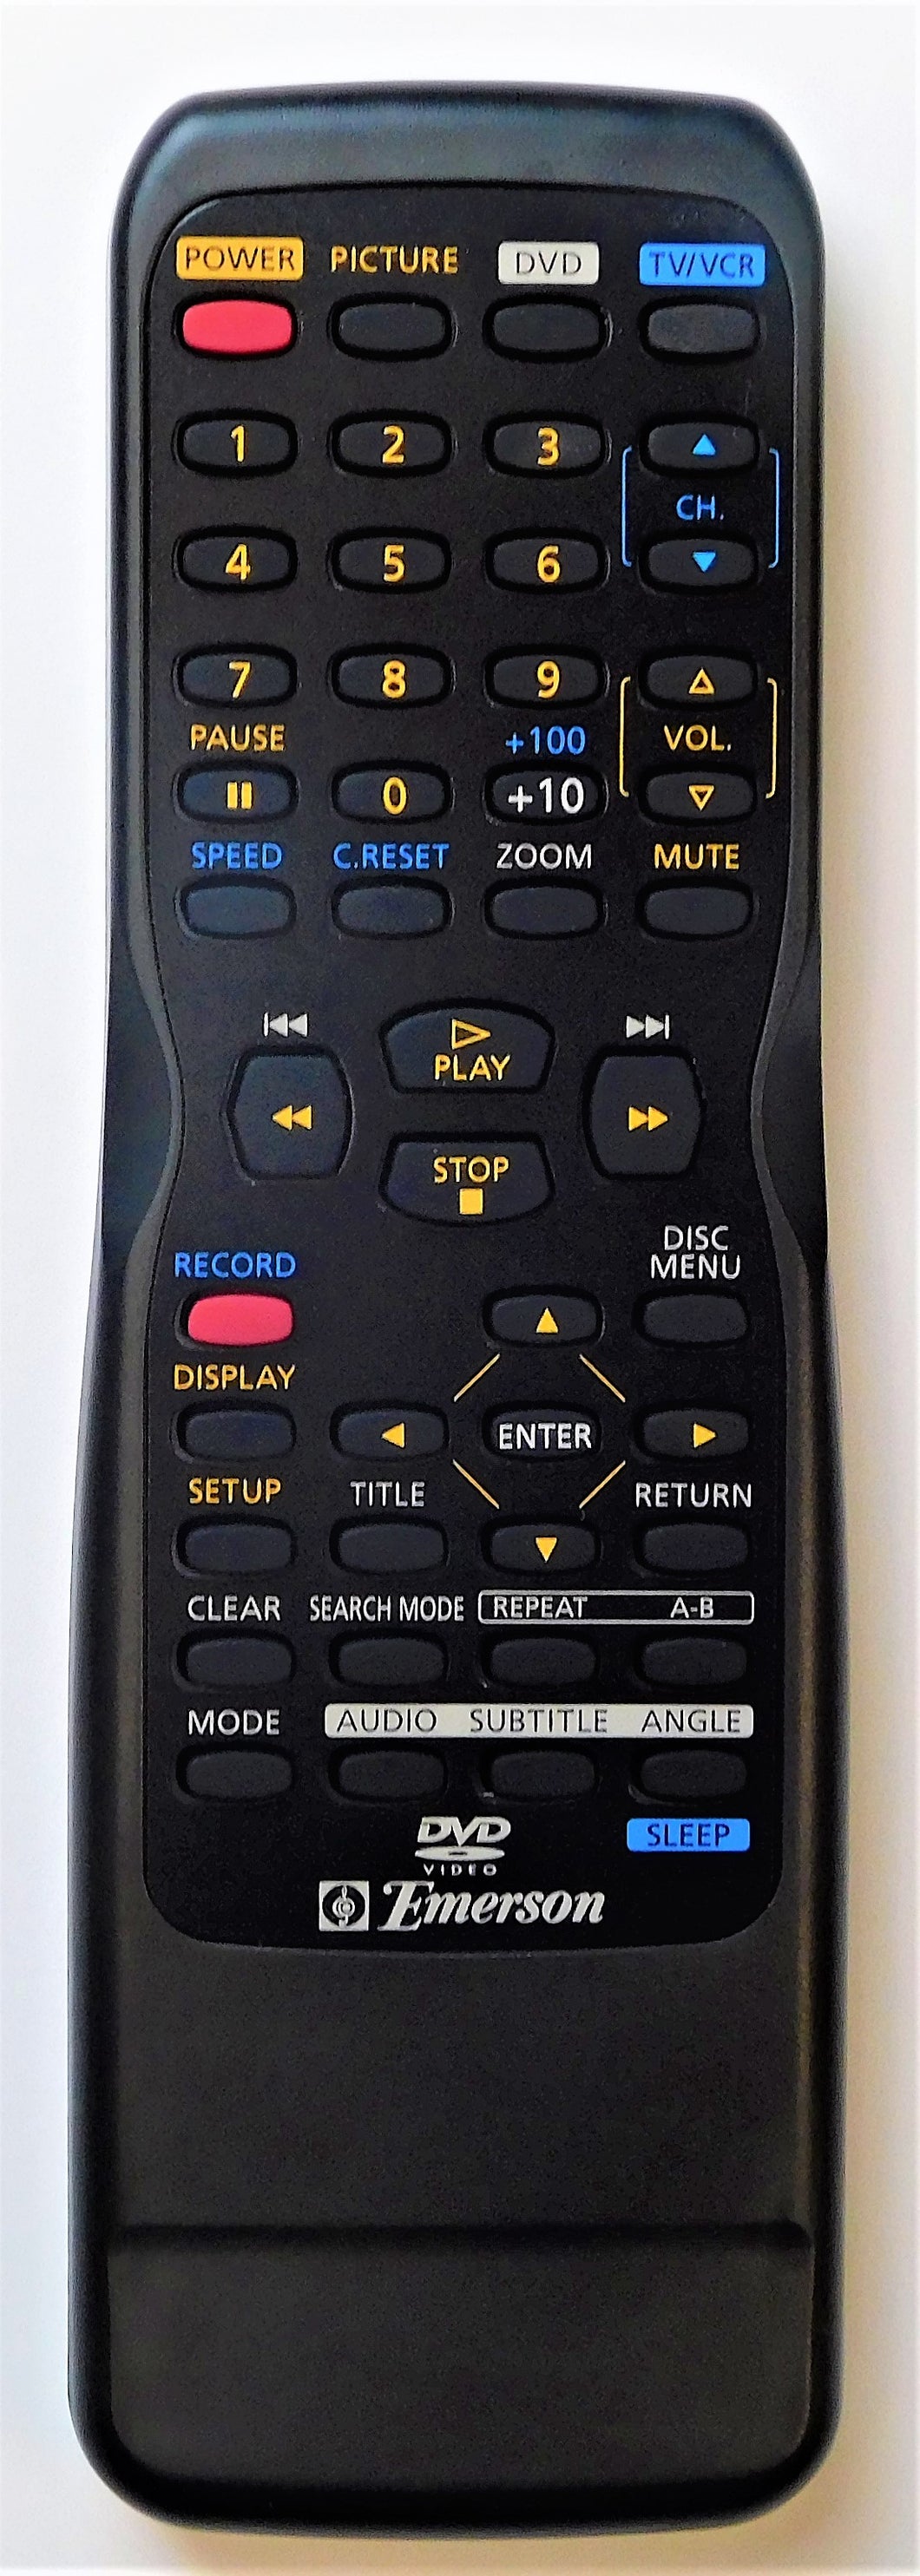 OEM replacement remote control for Emerson CRT TV NE201UD